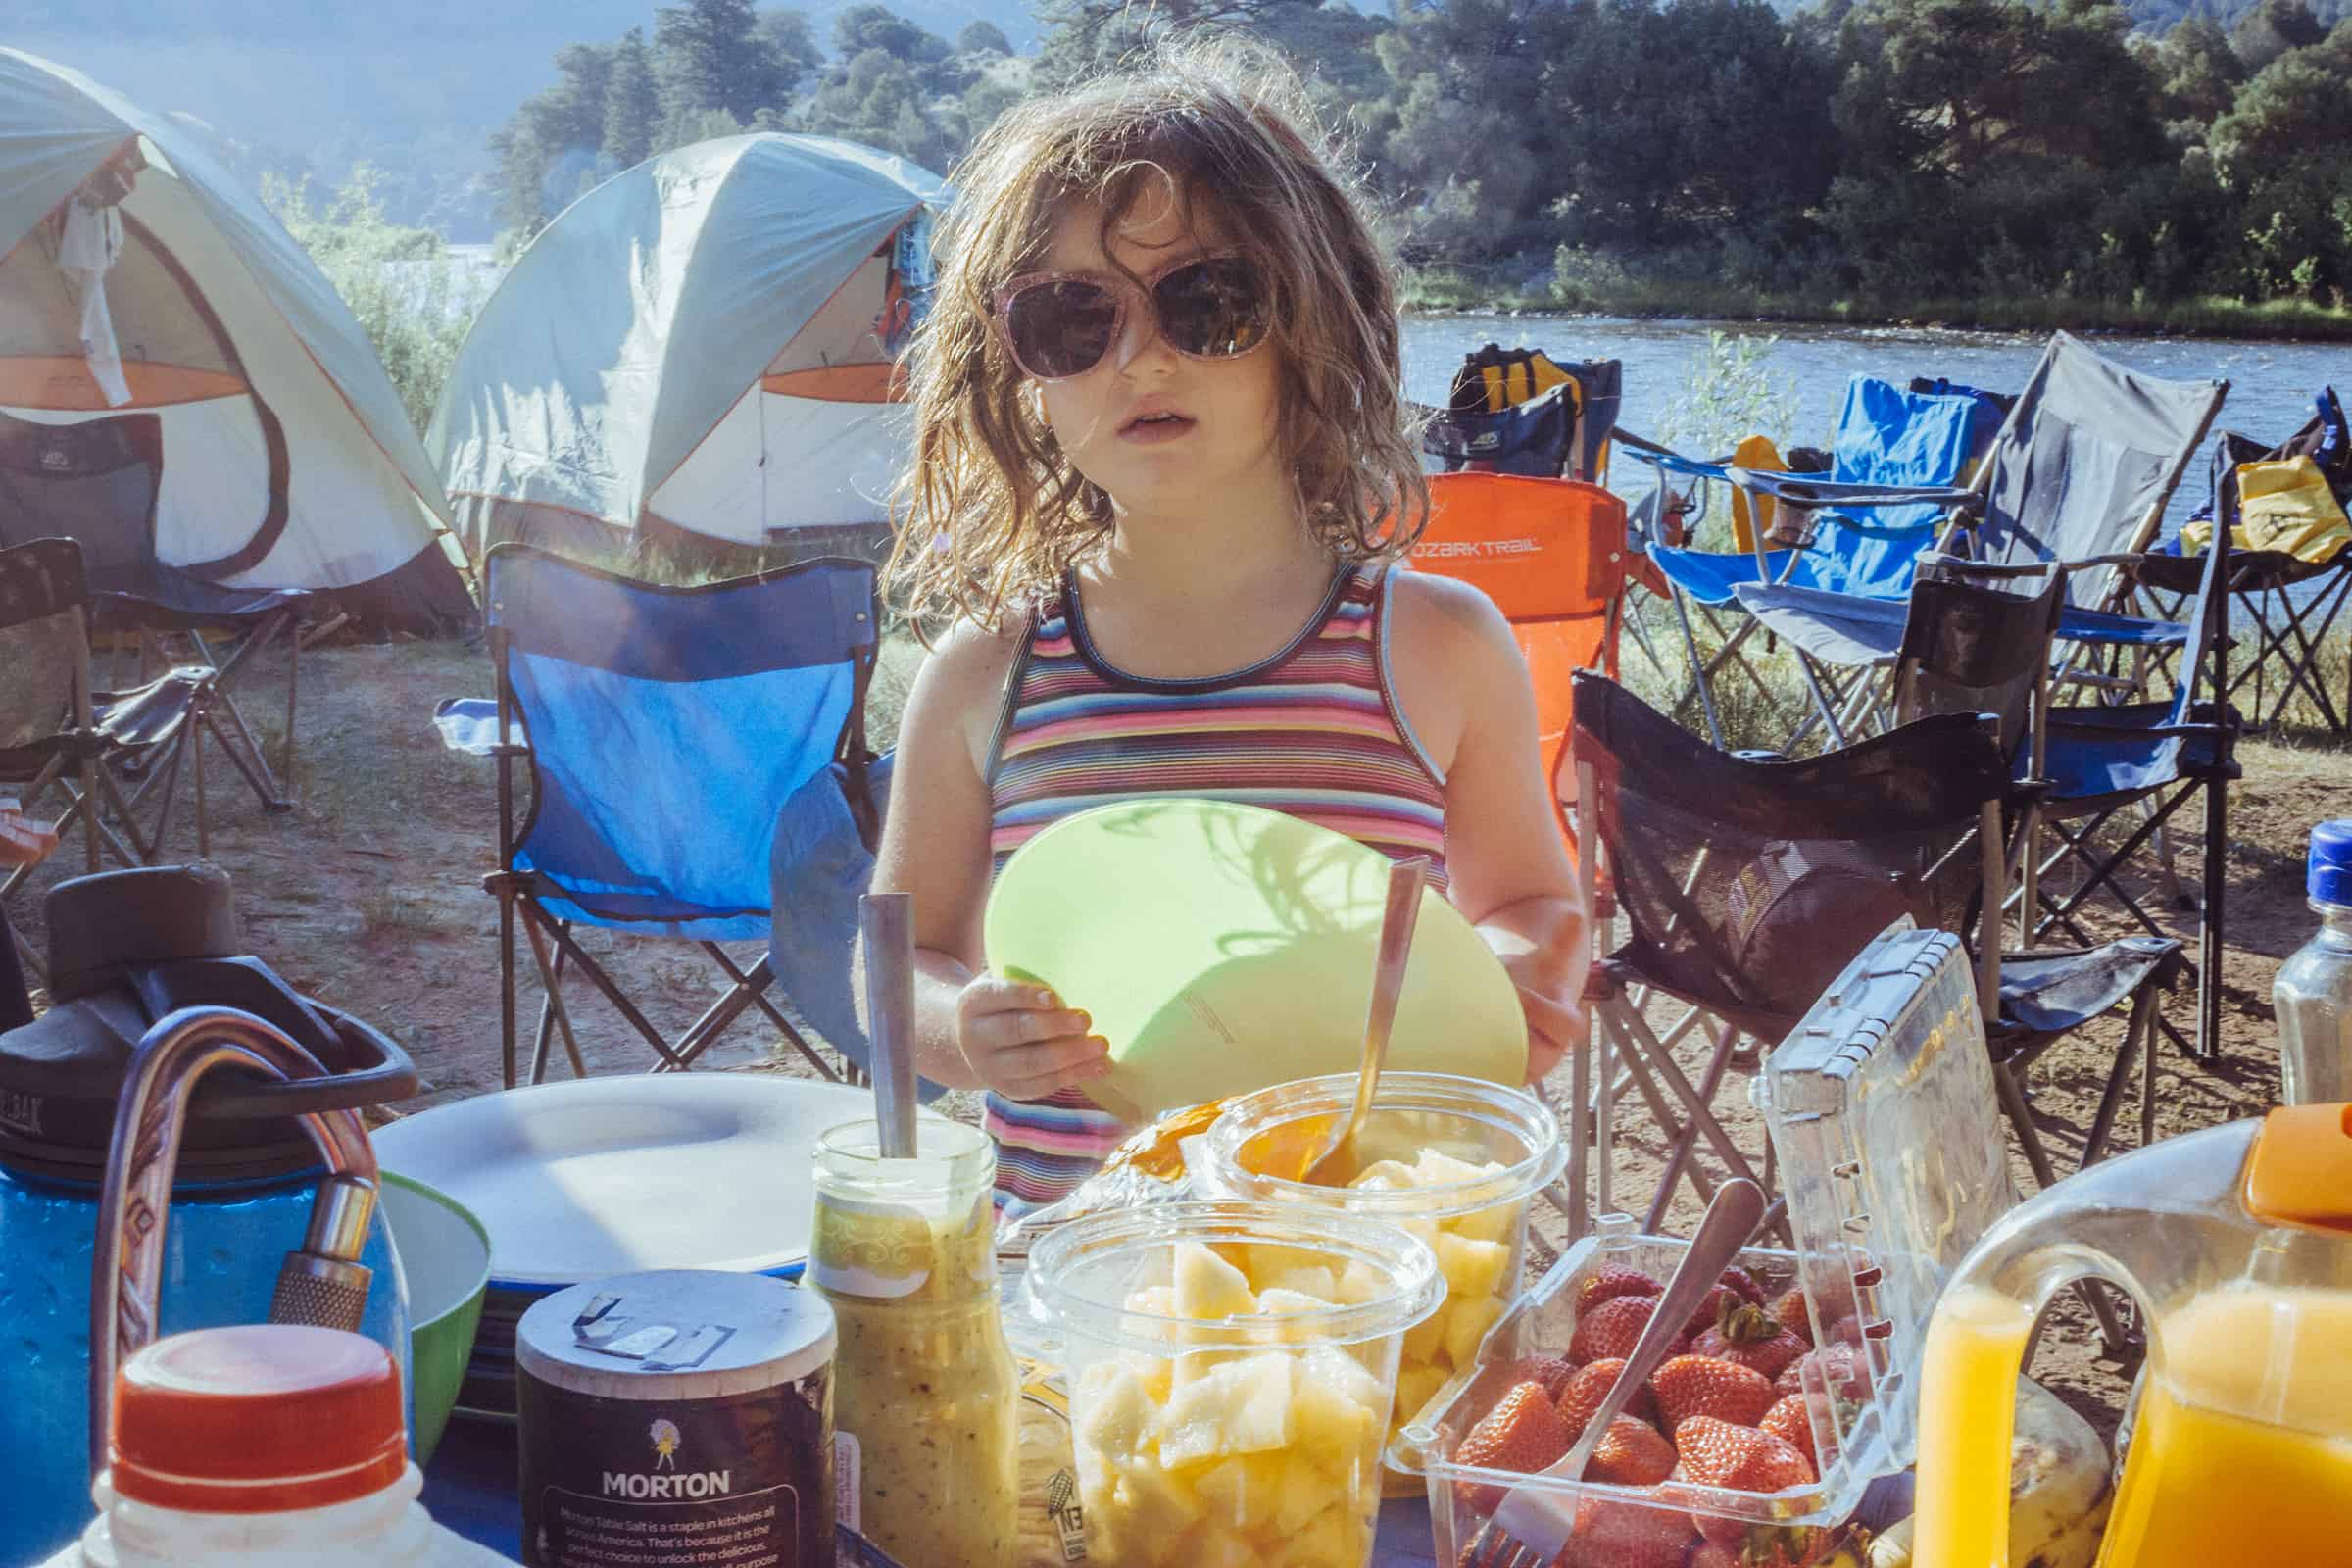 Child looks for a breakfast serving by a table filled with food on the river bank with camping chairs and tents in the background